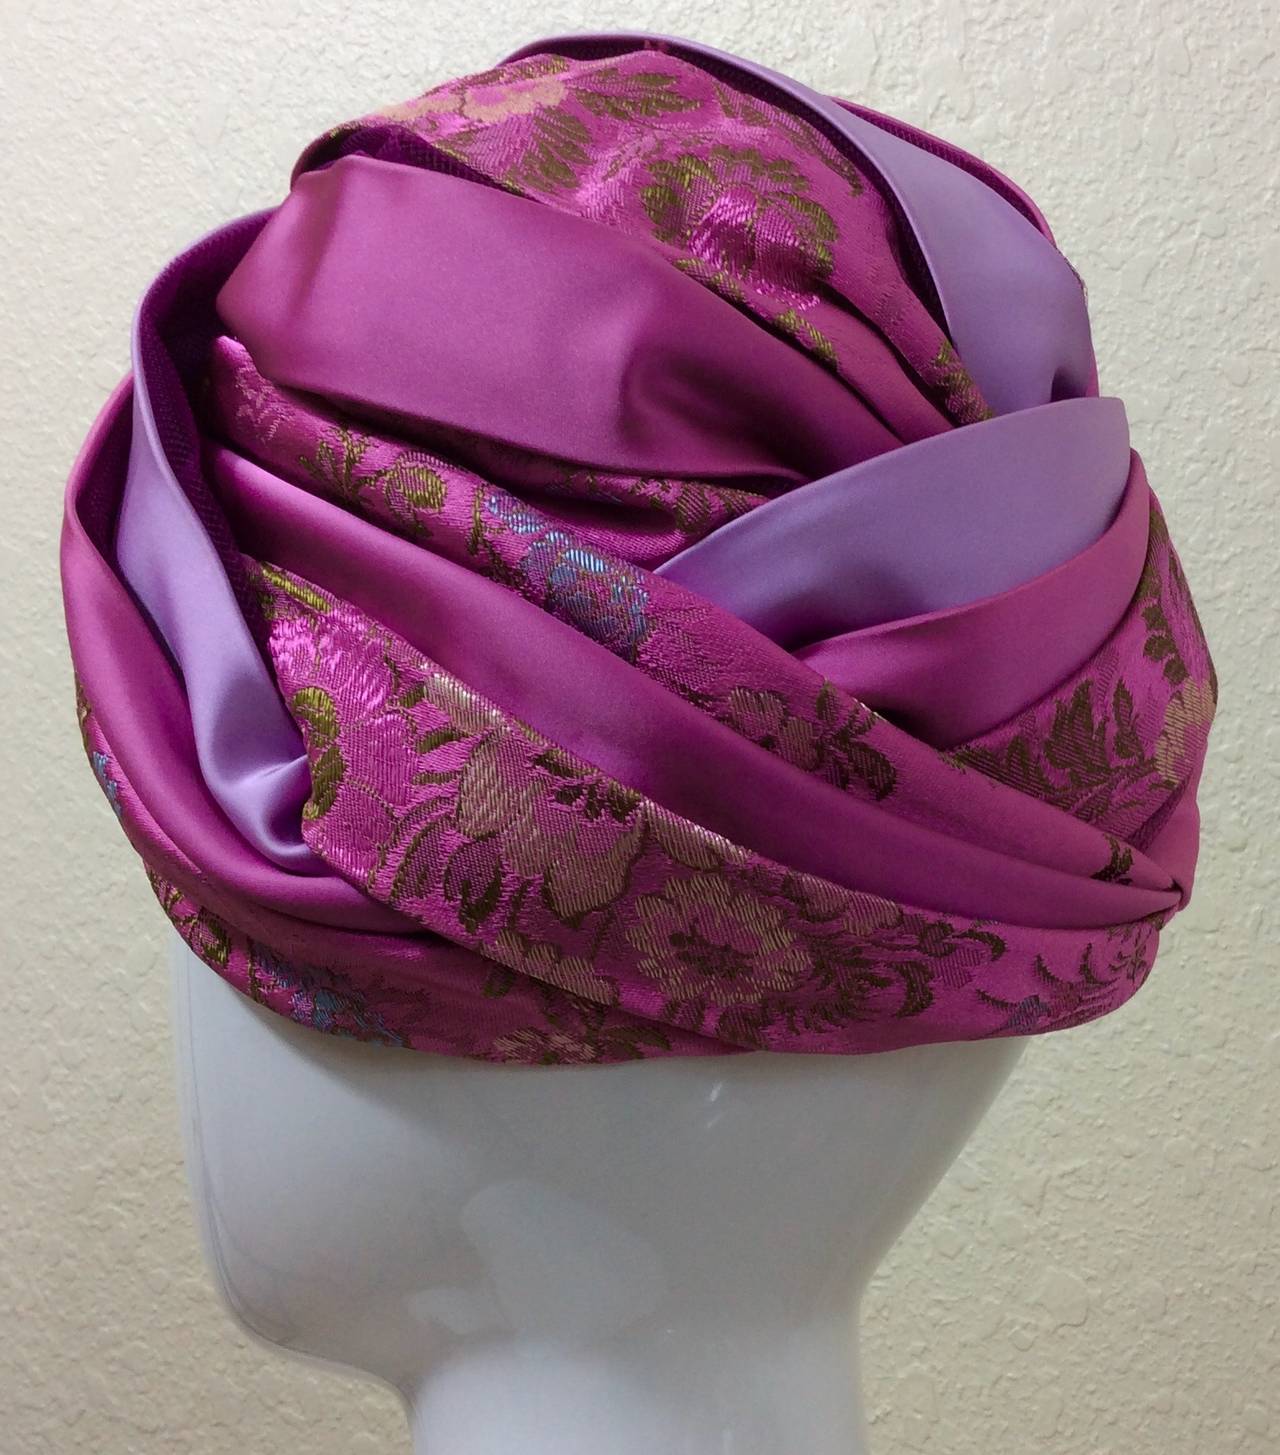 This is a magnificent vintage Christian Dior chapeaux turban. Featuring a mixture of satin in shads of pink and lavender, with alternating bands of a floral brocade with hints of gold and violet. Peaking through the bands of satin and brocade are